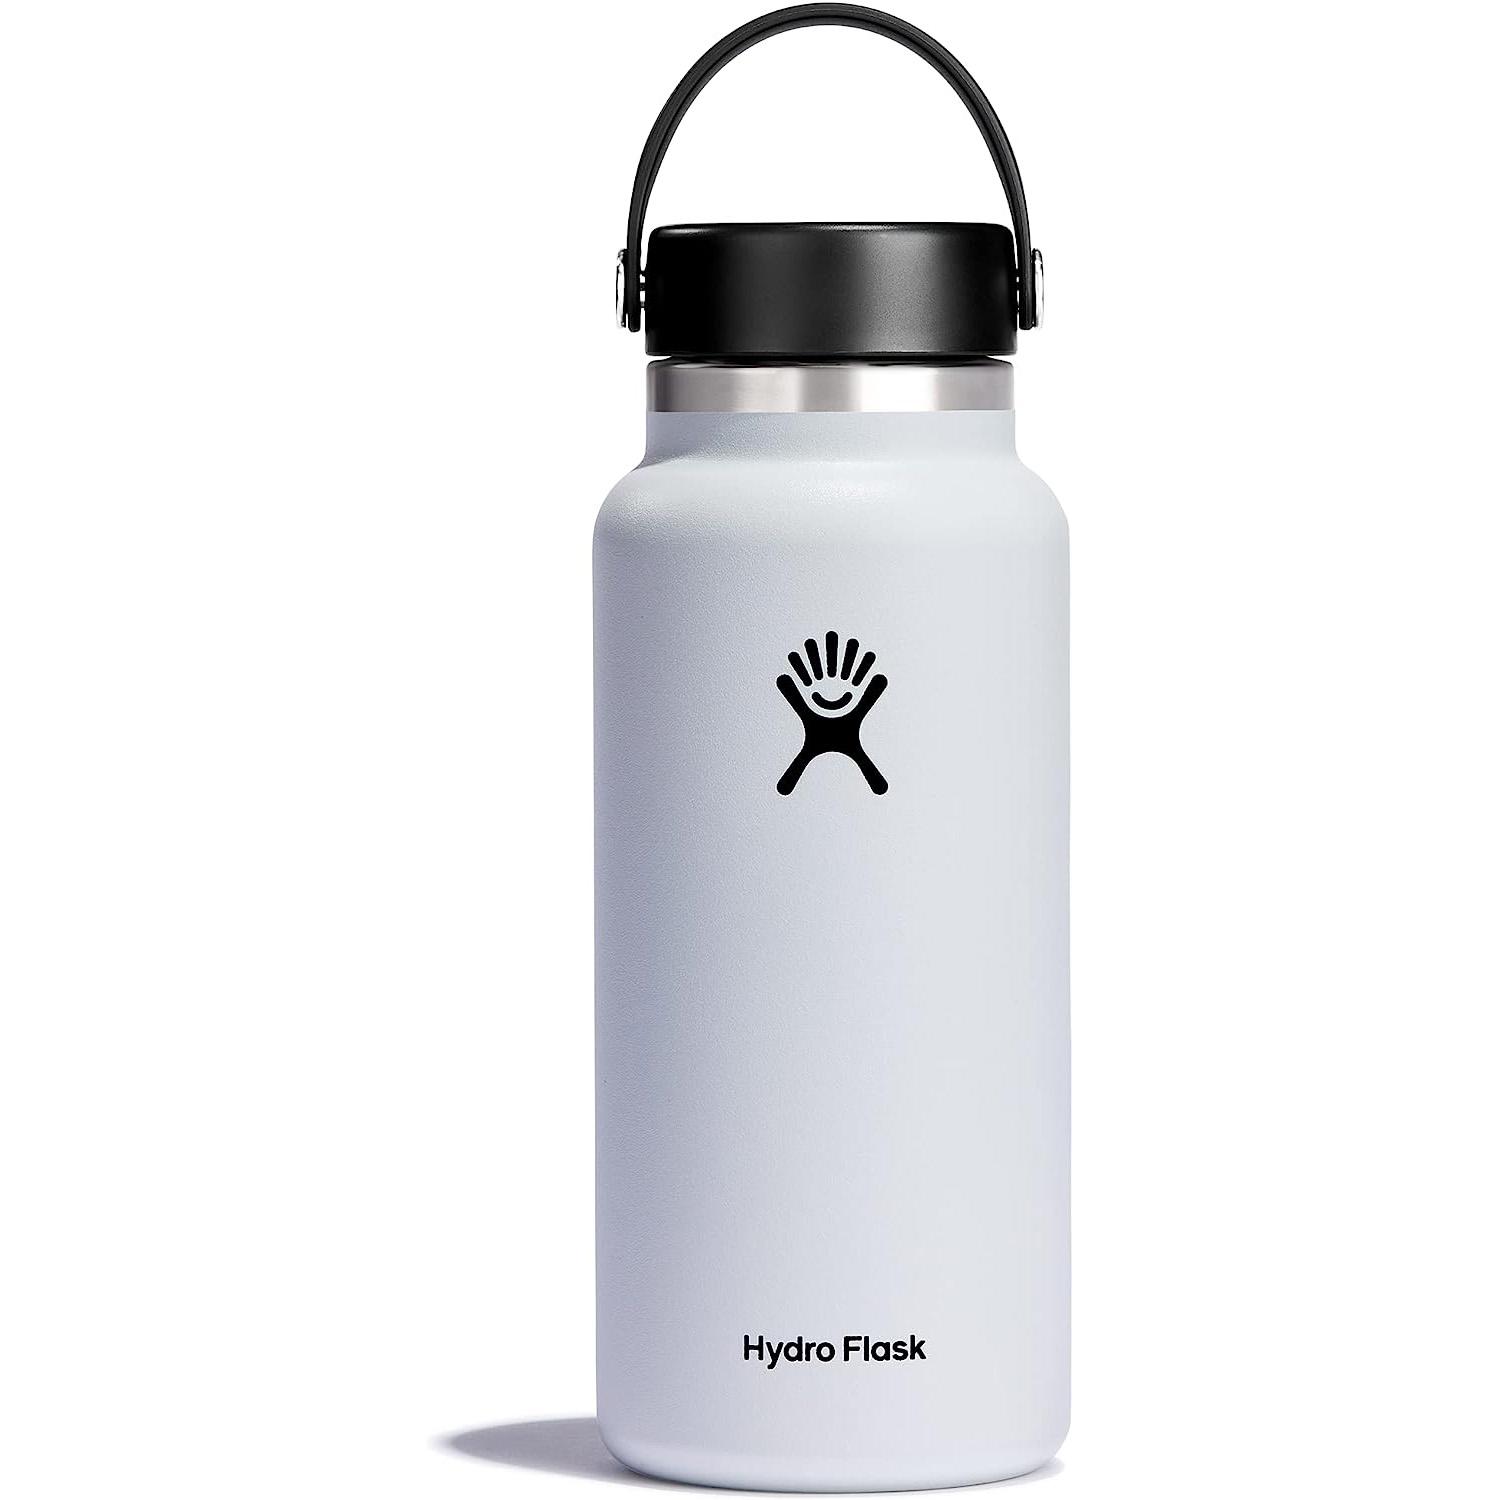 Hydro Flask Wide Mouth 32oz Bottle for $19.97